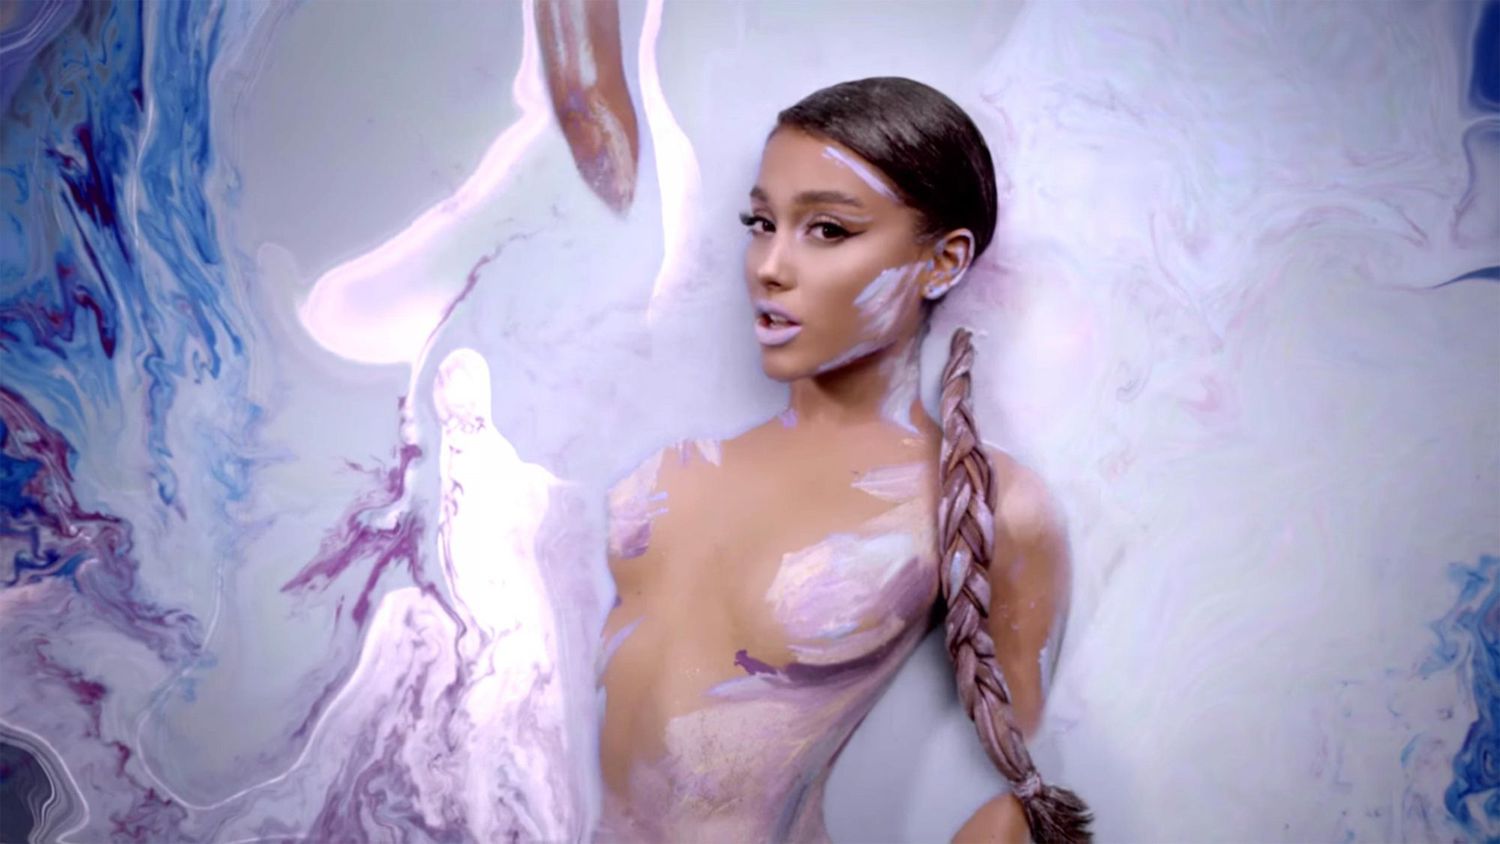 anna franke recommends has ariana grande nude pic